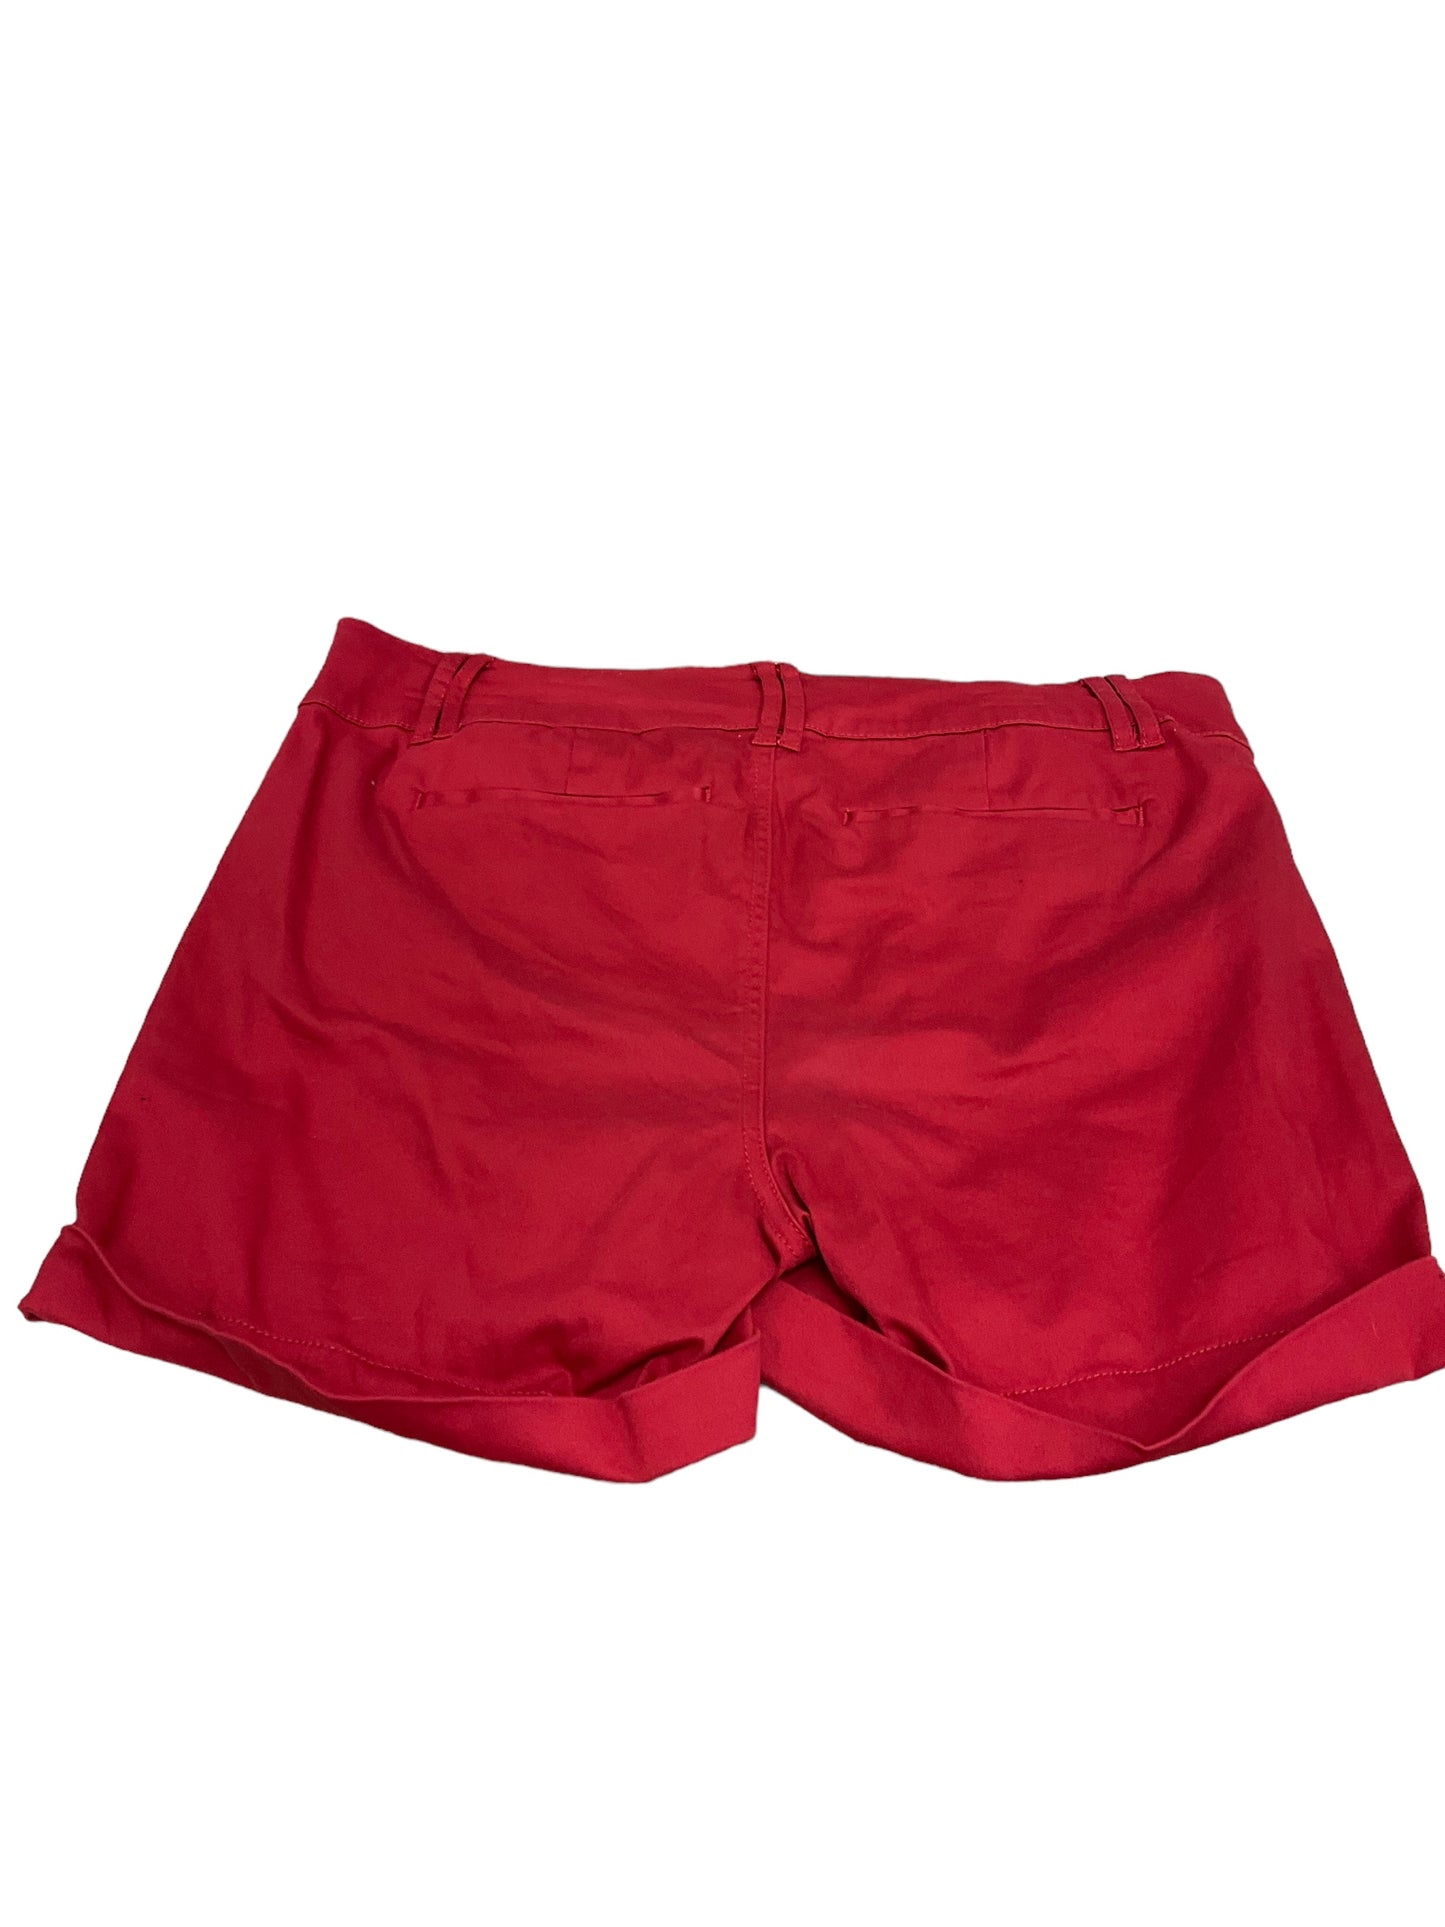 Shorts By Torrid  Size: 12